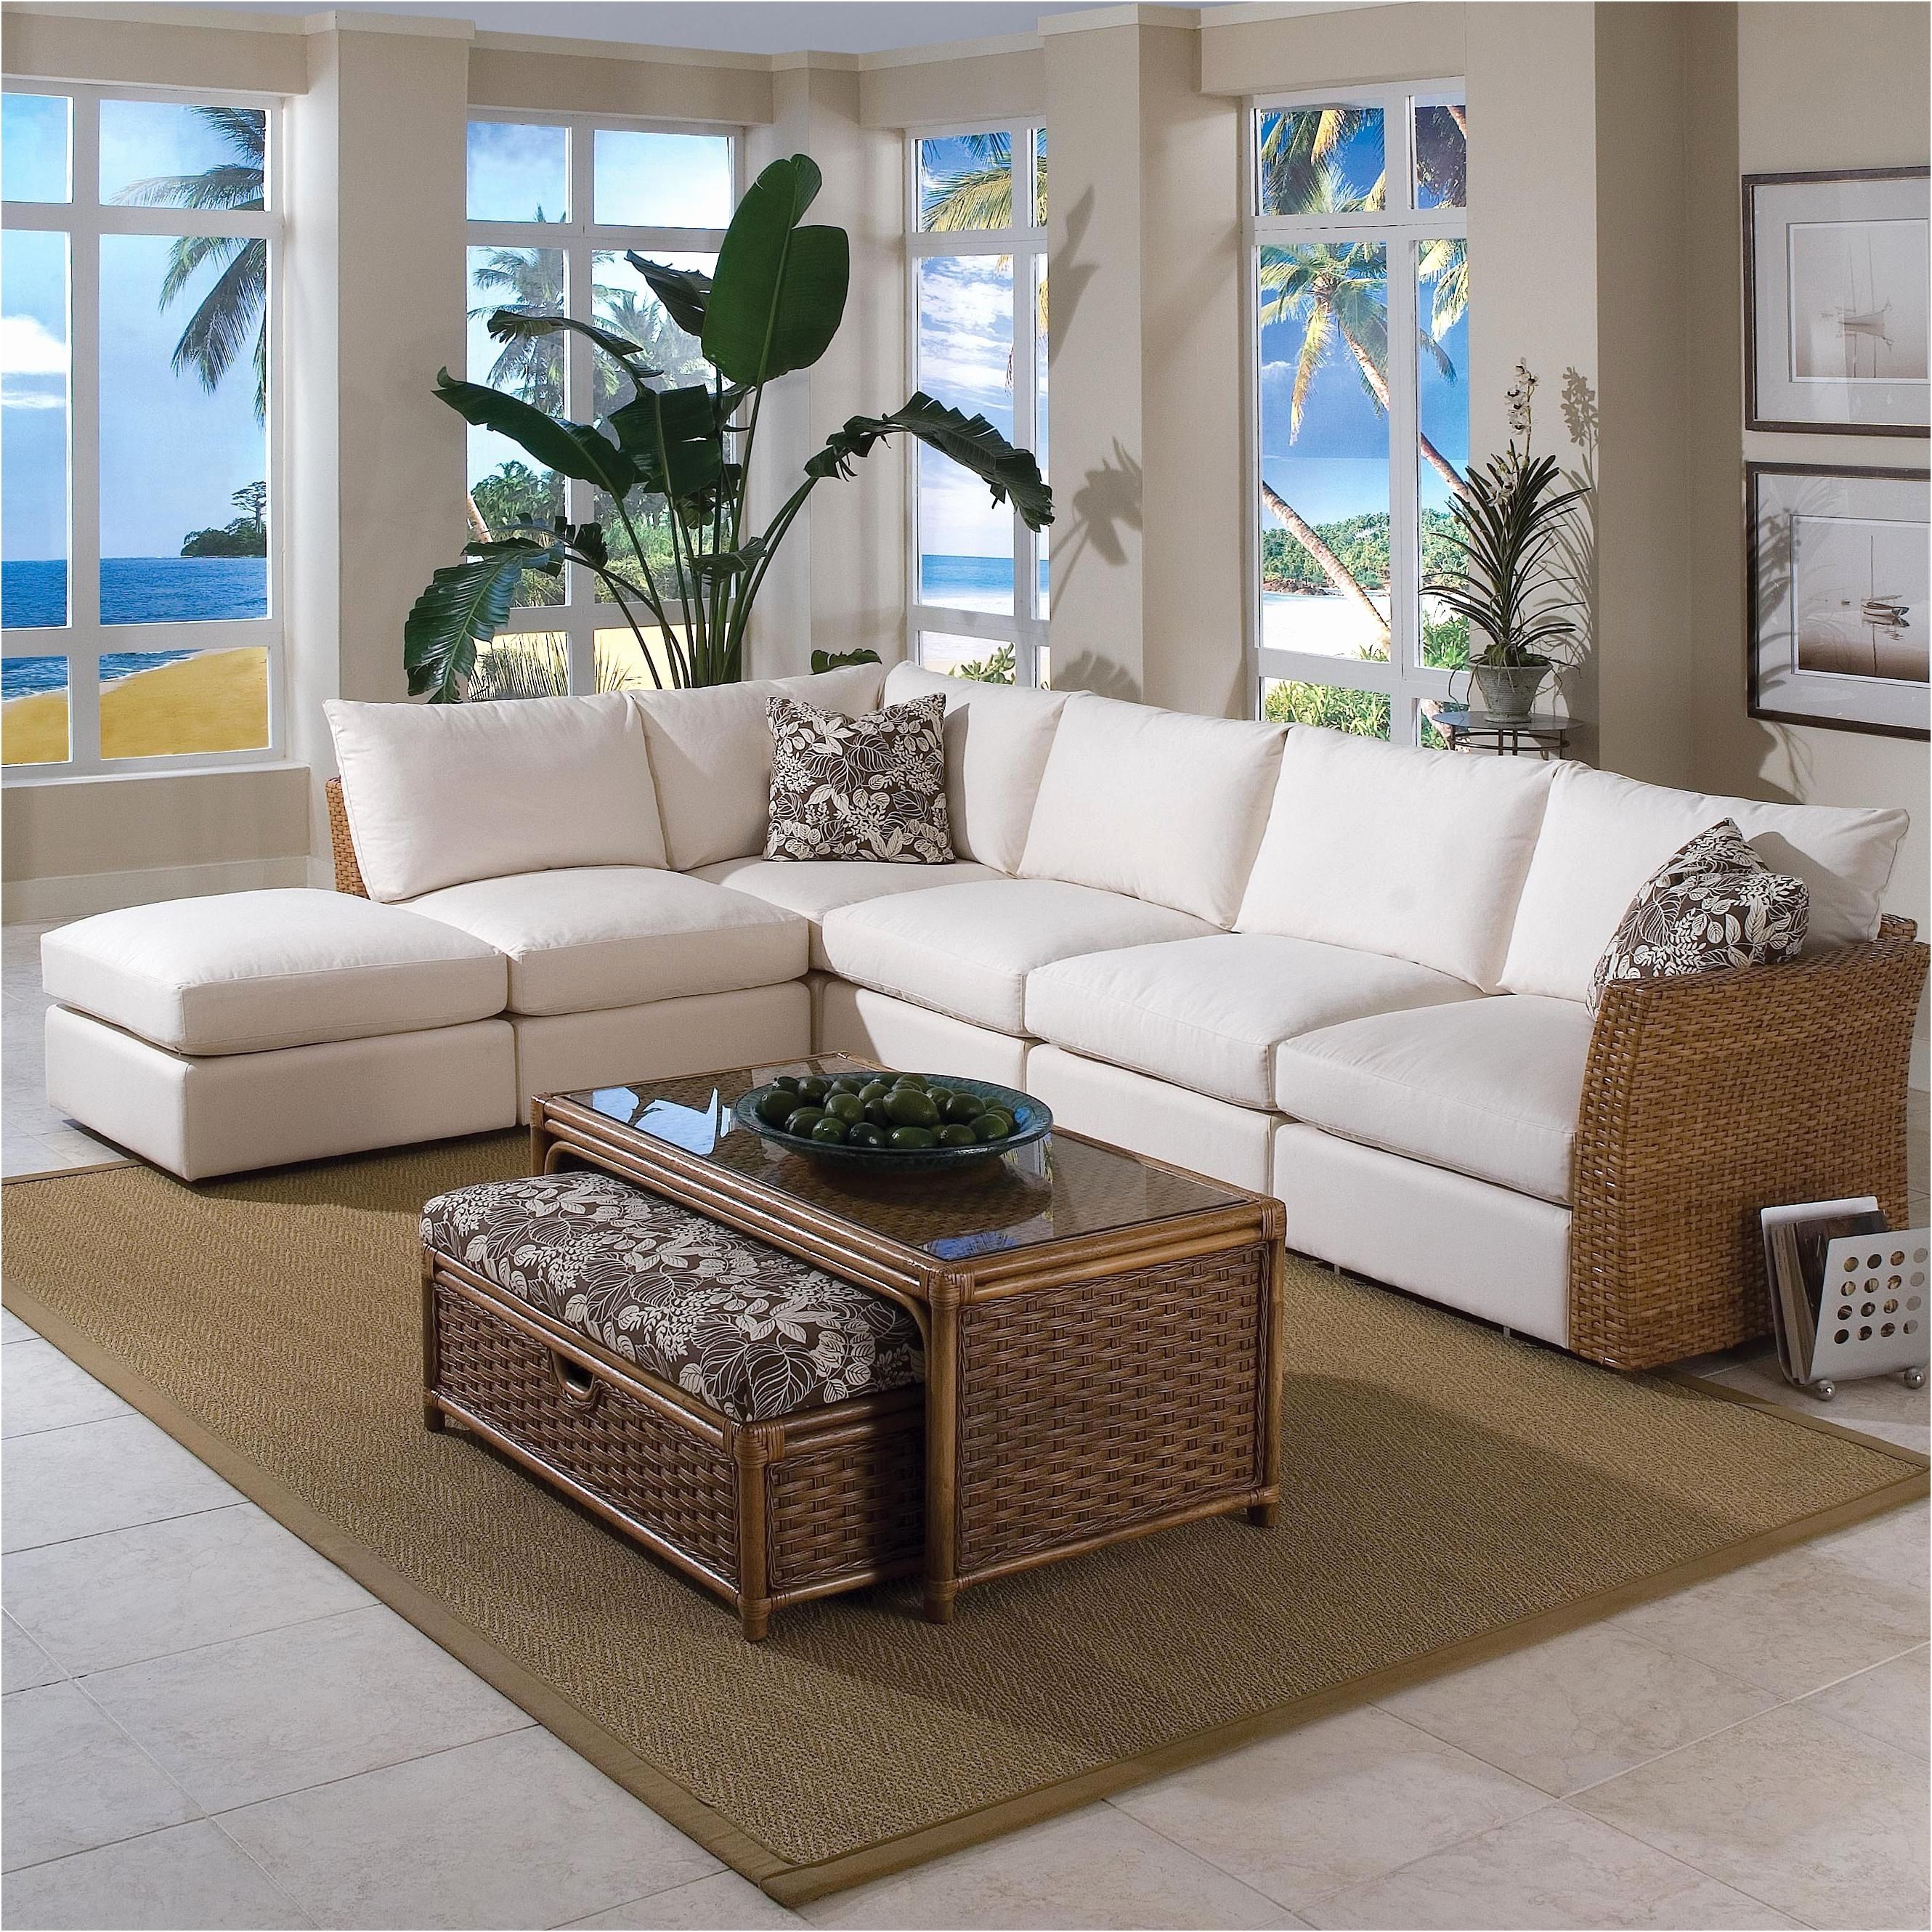 Awesome Cheap Sectional Sofas Awesome – Intuisiblog In Greenville Nc Sectional Sofas (View 3 of 10)